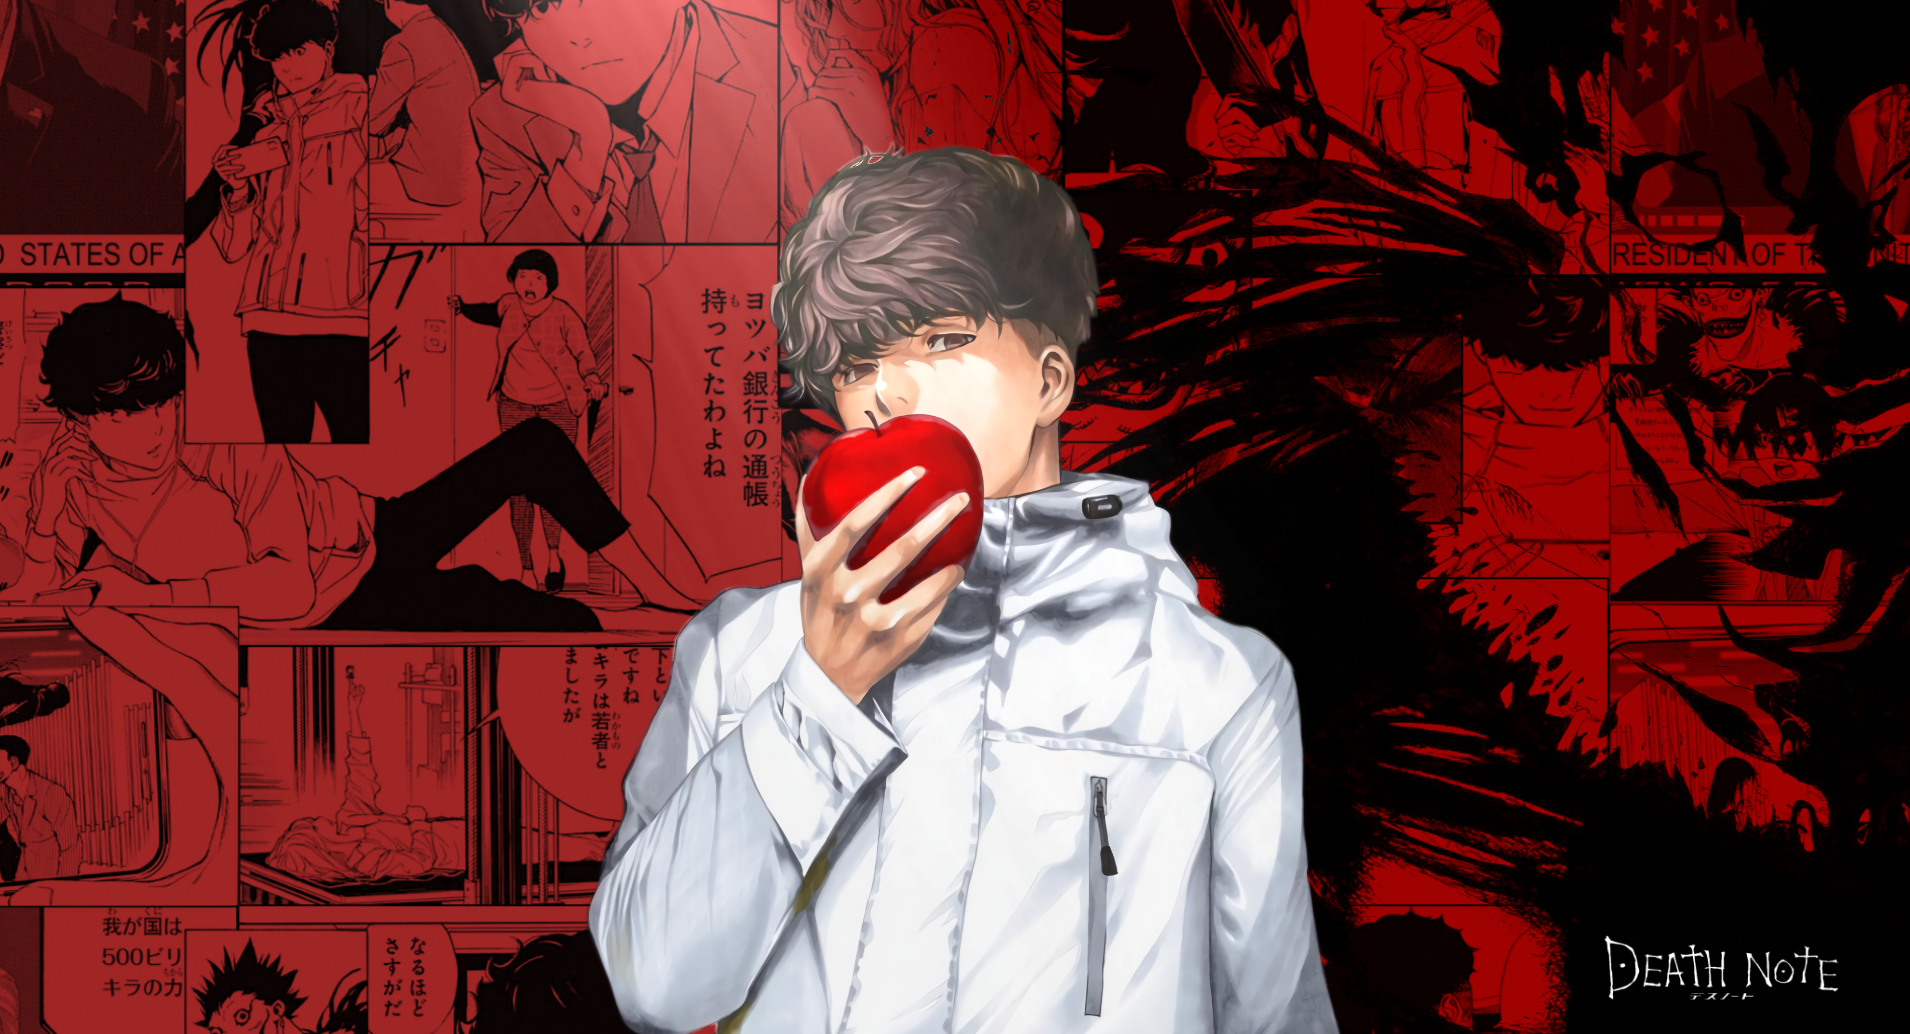 If anyone uses Wallpaper Engine, I made an animated wallpaper of Minoru: deathnote